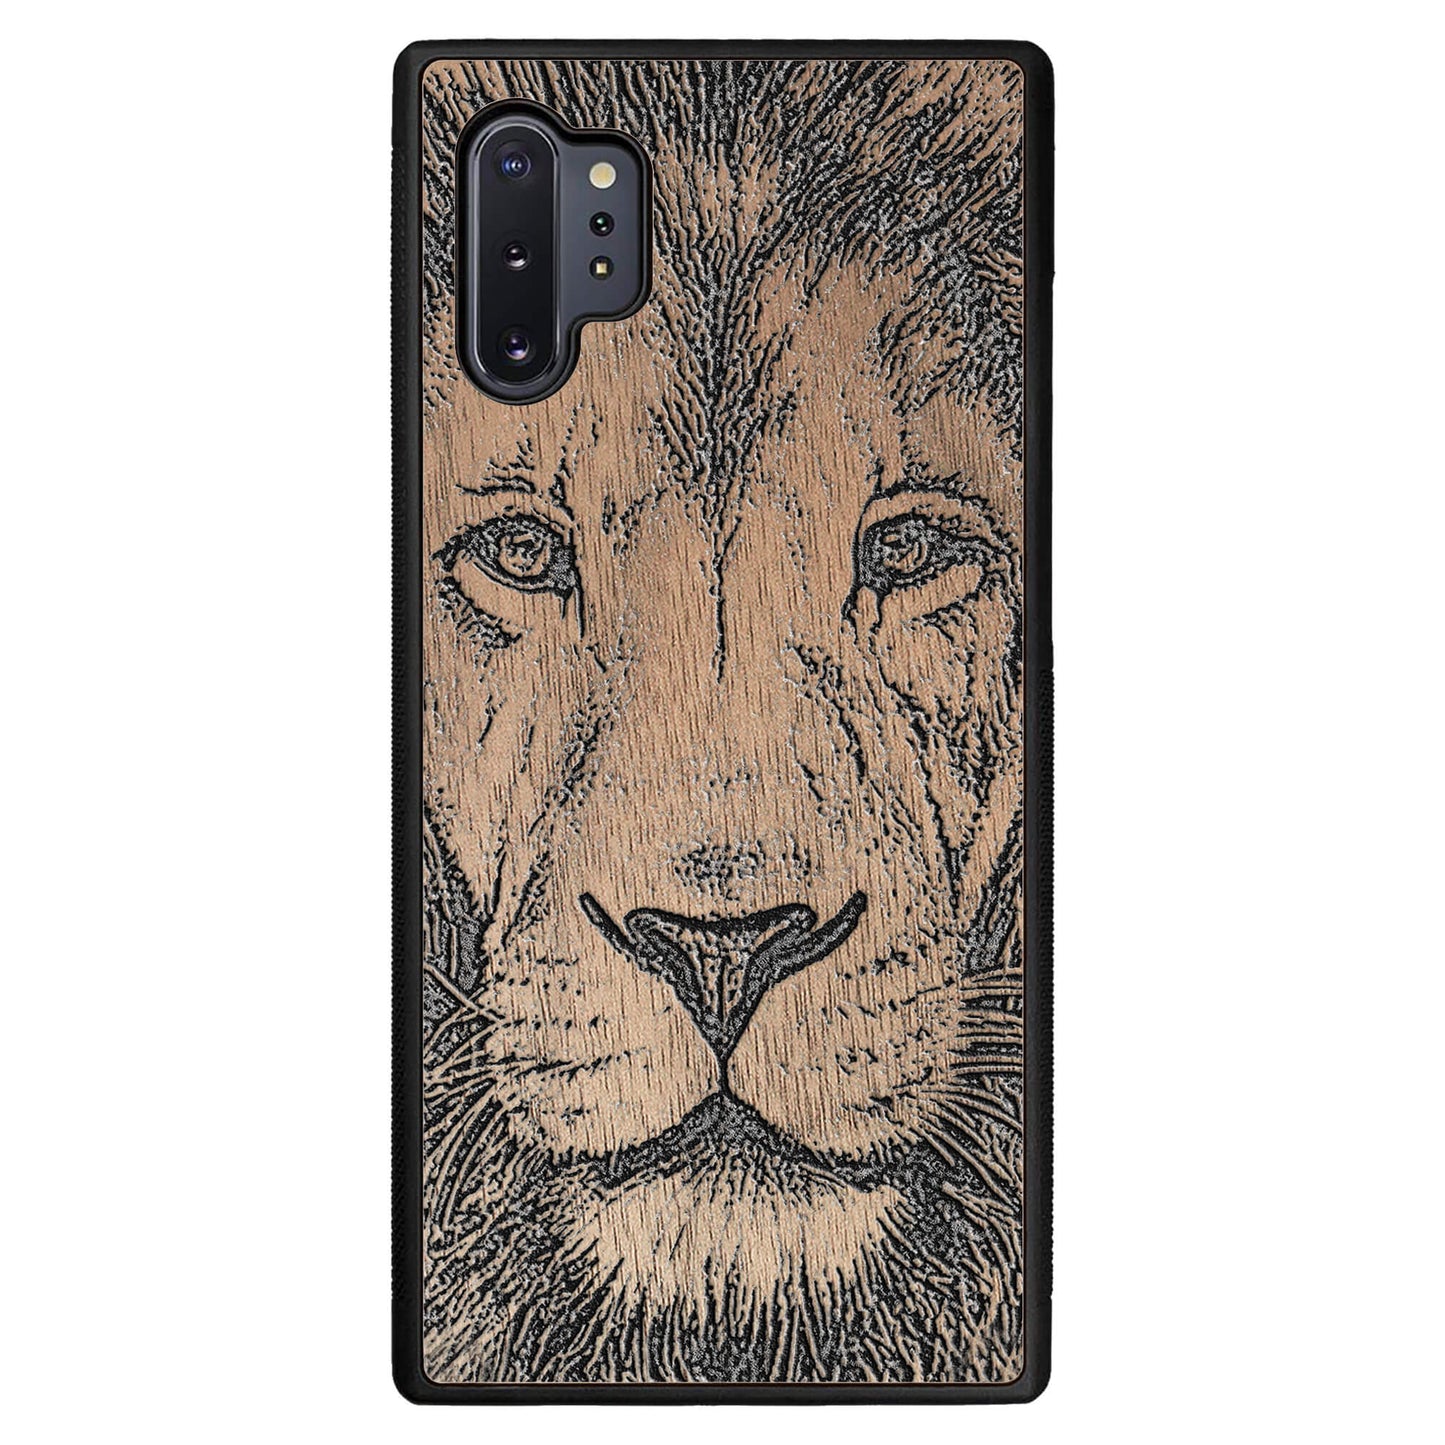 Wooden Case for Samsung Galaxy Note 10 Plus Lion face